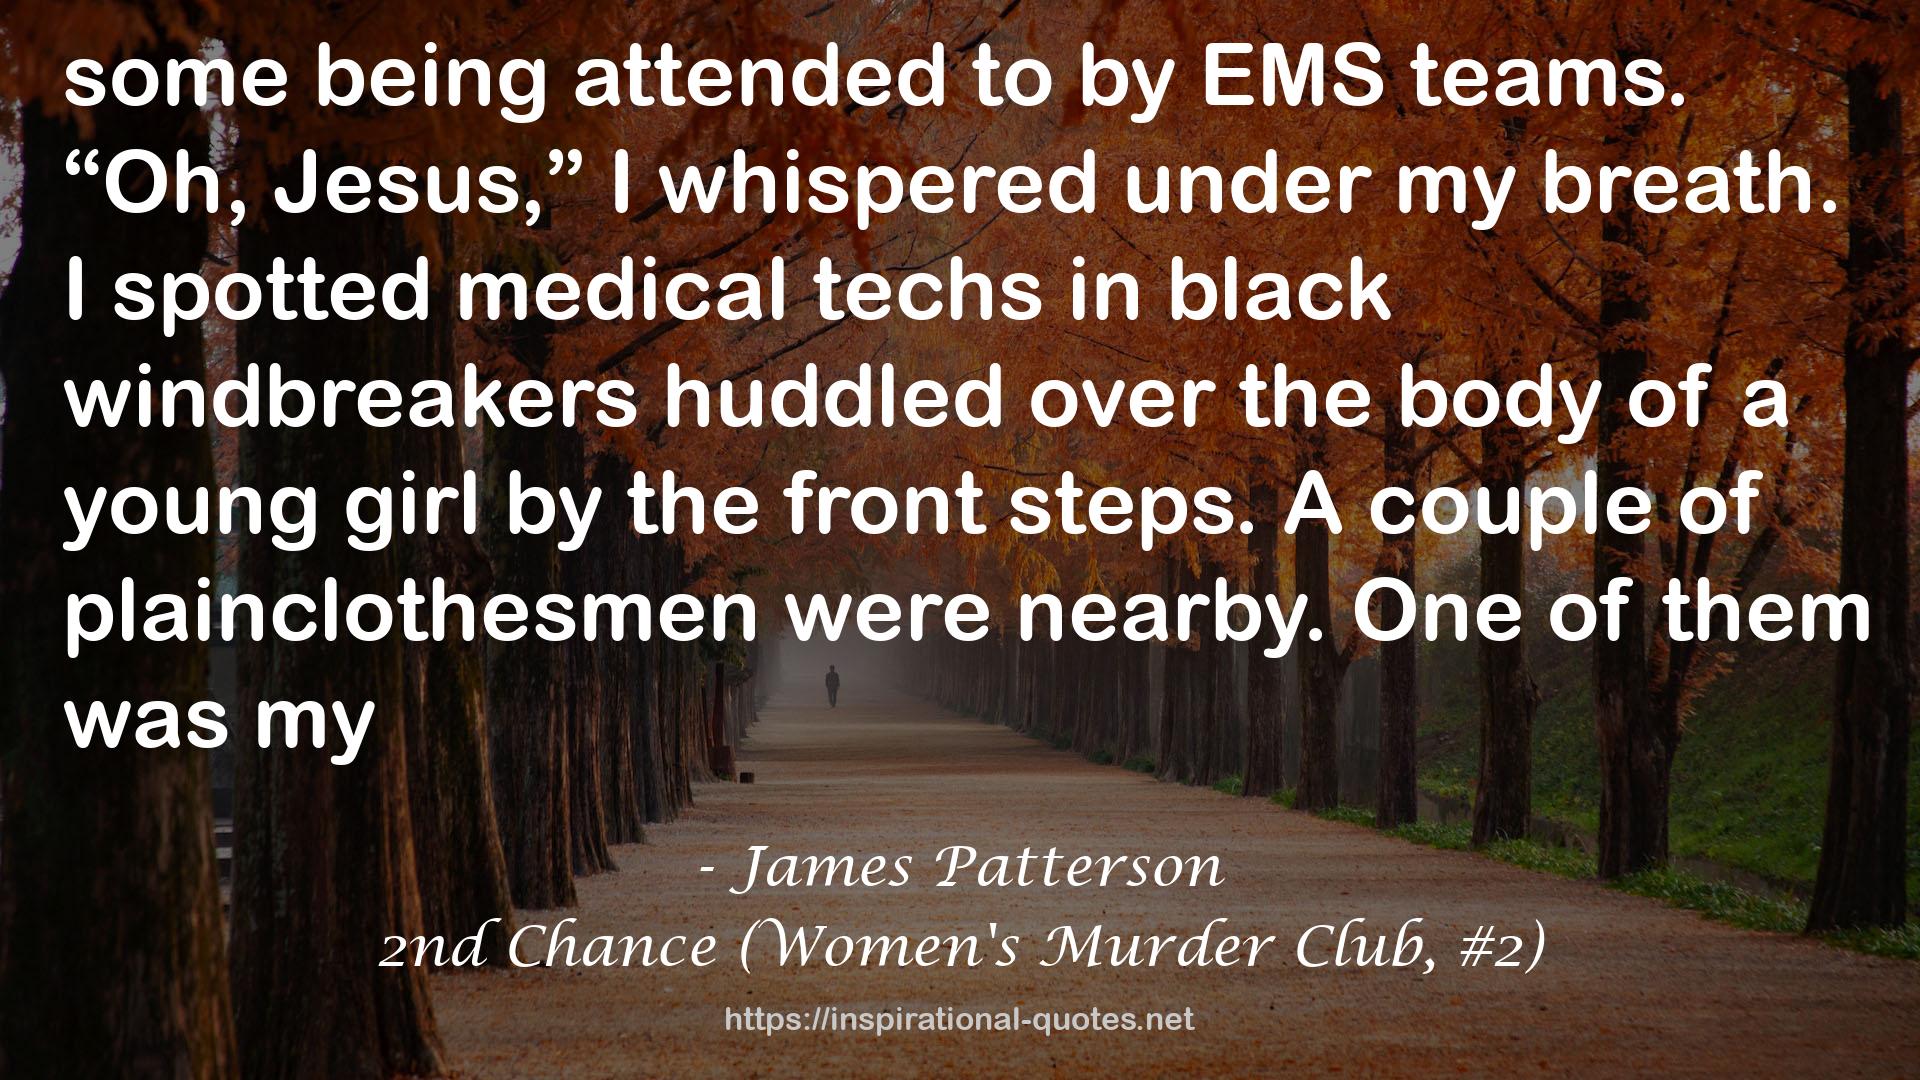 2nd Chance (Women's Murder Club, #2) QUOTES